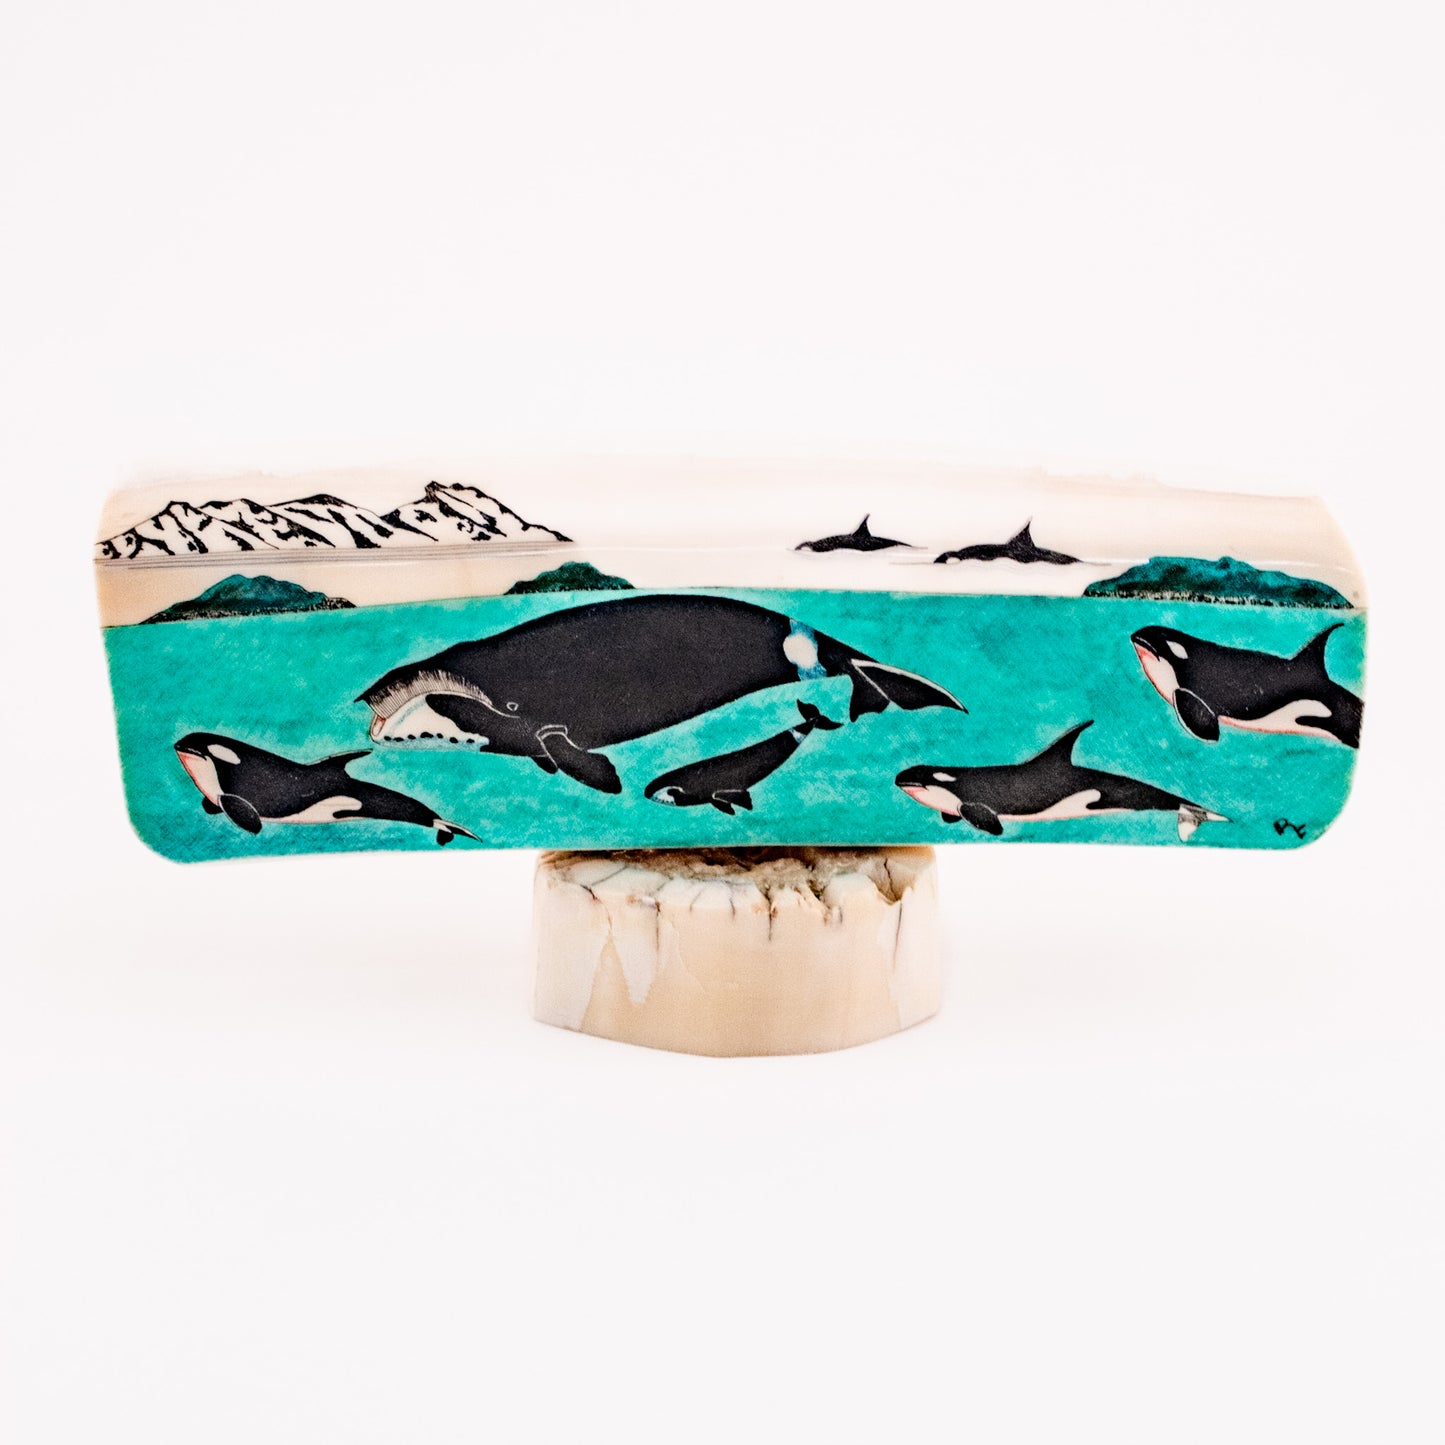 Bowhead Whale and Orca Scrimshaw